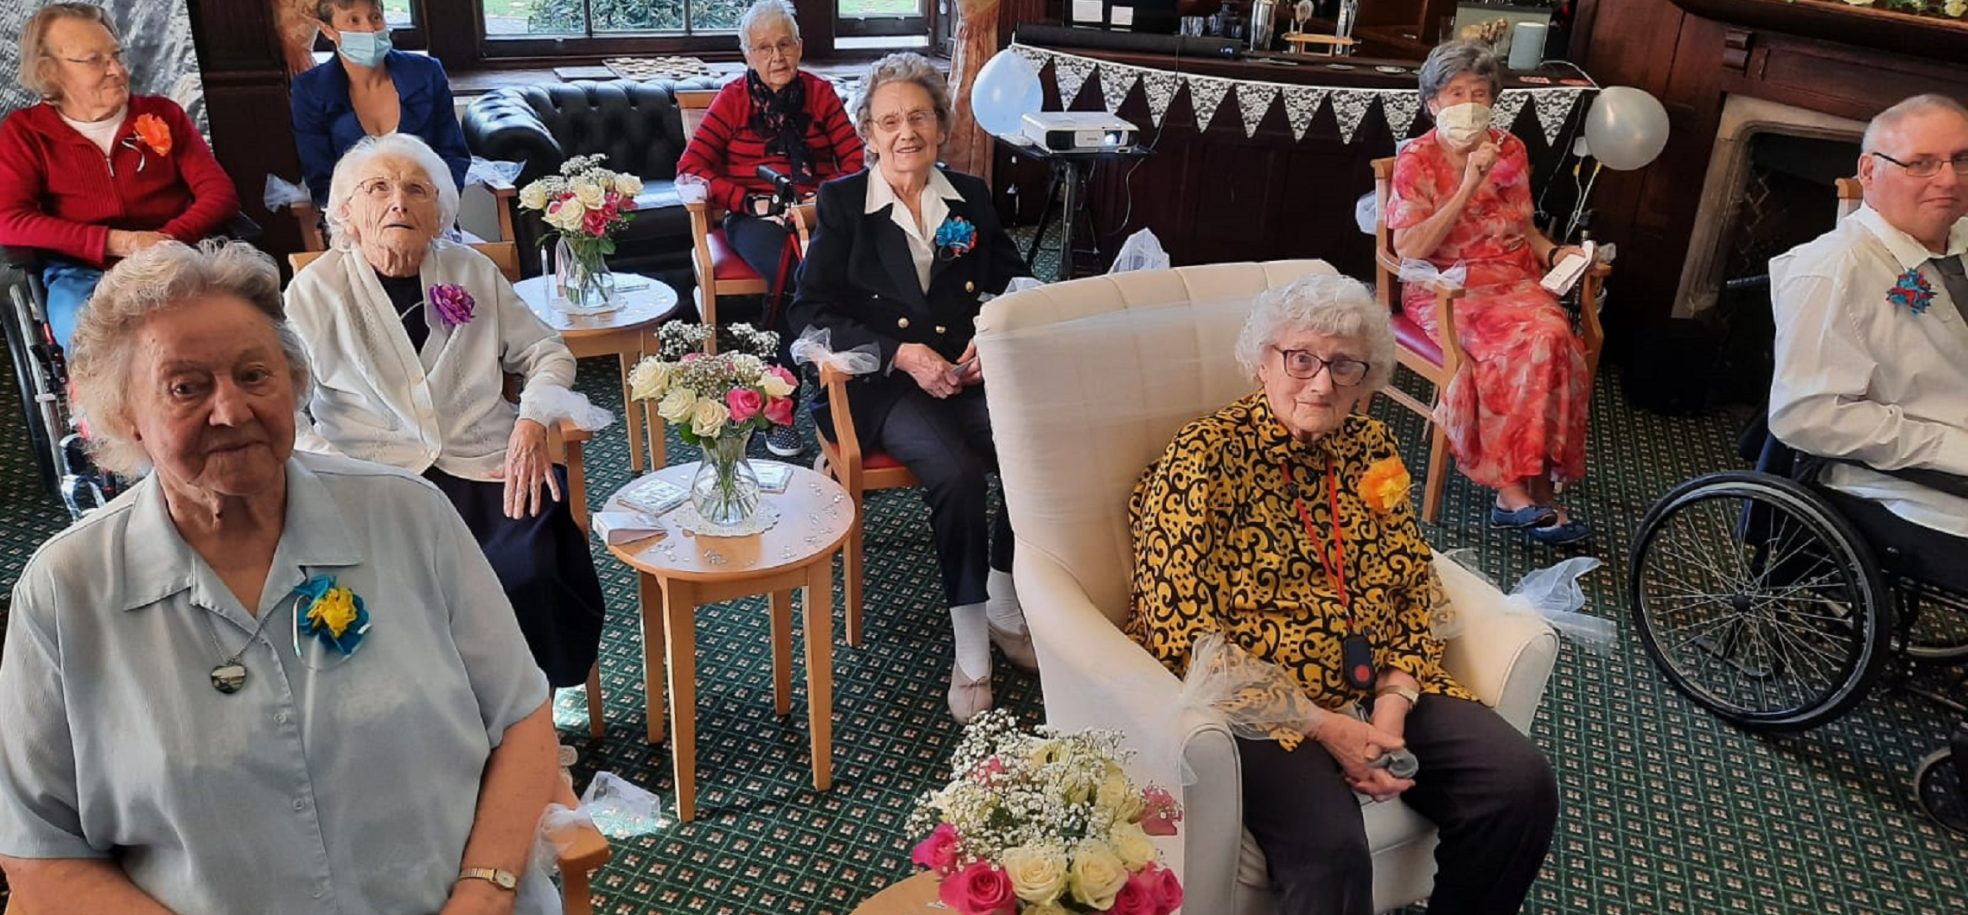 Prince Edward Duke of Kent Court resident Dot Bash (wearing a yellow patterned blouse) watching a live stream of her granddaughter’s wedding with fellow residents.